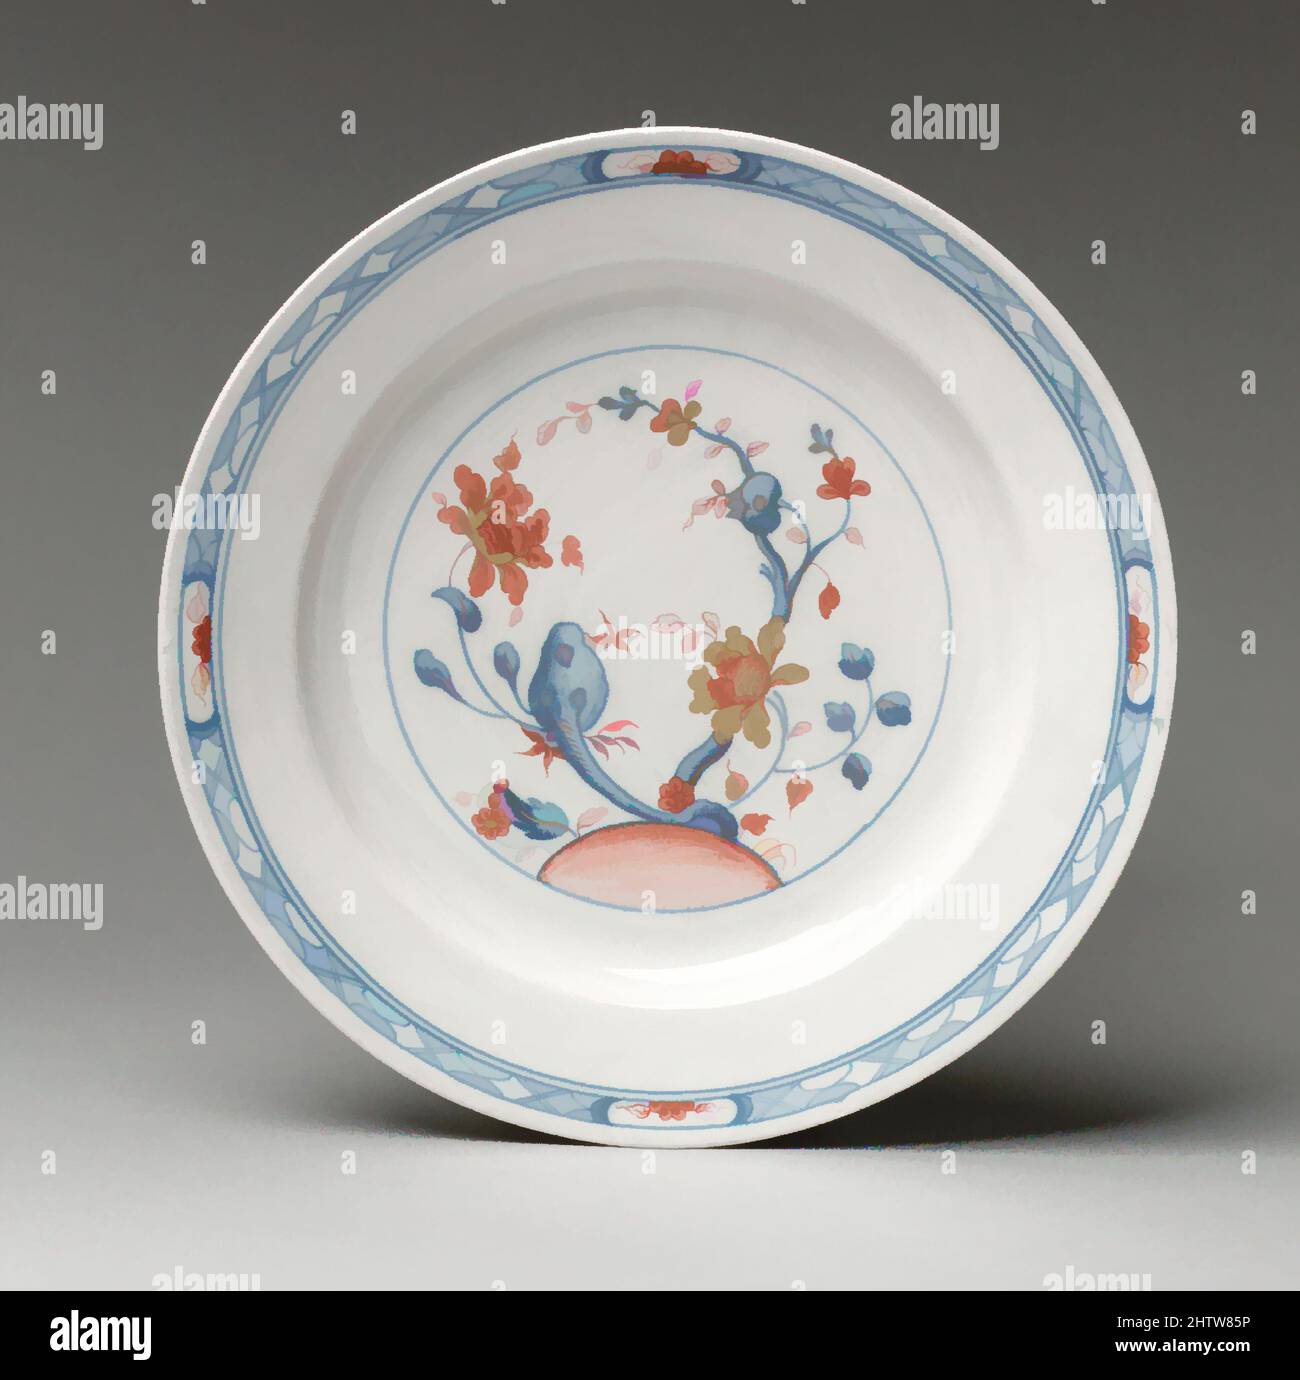 Art inspired by Plate, ca. 1765, Swiss, Zurich, Tin-glazed earthenware, Diameter: 9 1/4 in. (23.5 cm), Ceramics-Pottery, Classic works modernized by Artotop with a splash of modernity. Shapes, color and value, eye-catching visual impact on art. Emotions through freedom of artworks in a contemporary way. A timeless message pursuing a wildly creative new direction. Artists turning to the digital medium and creating the Artotop NFT Stock Photo